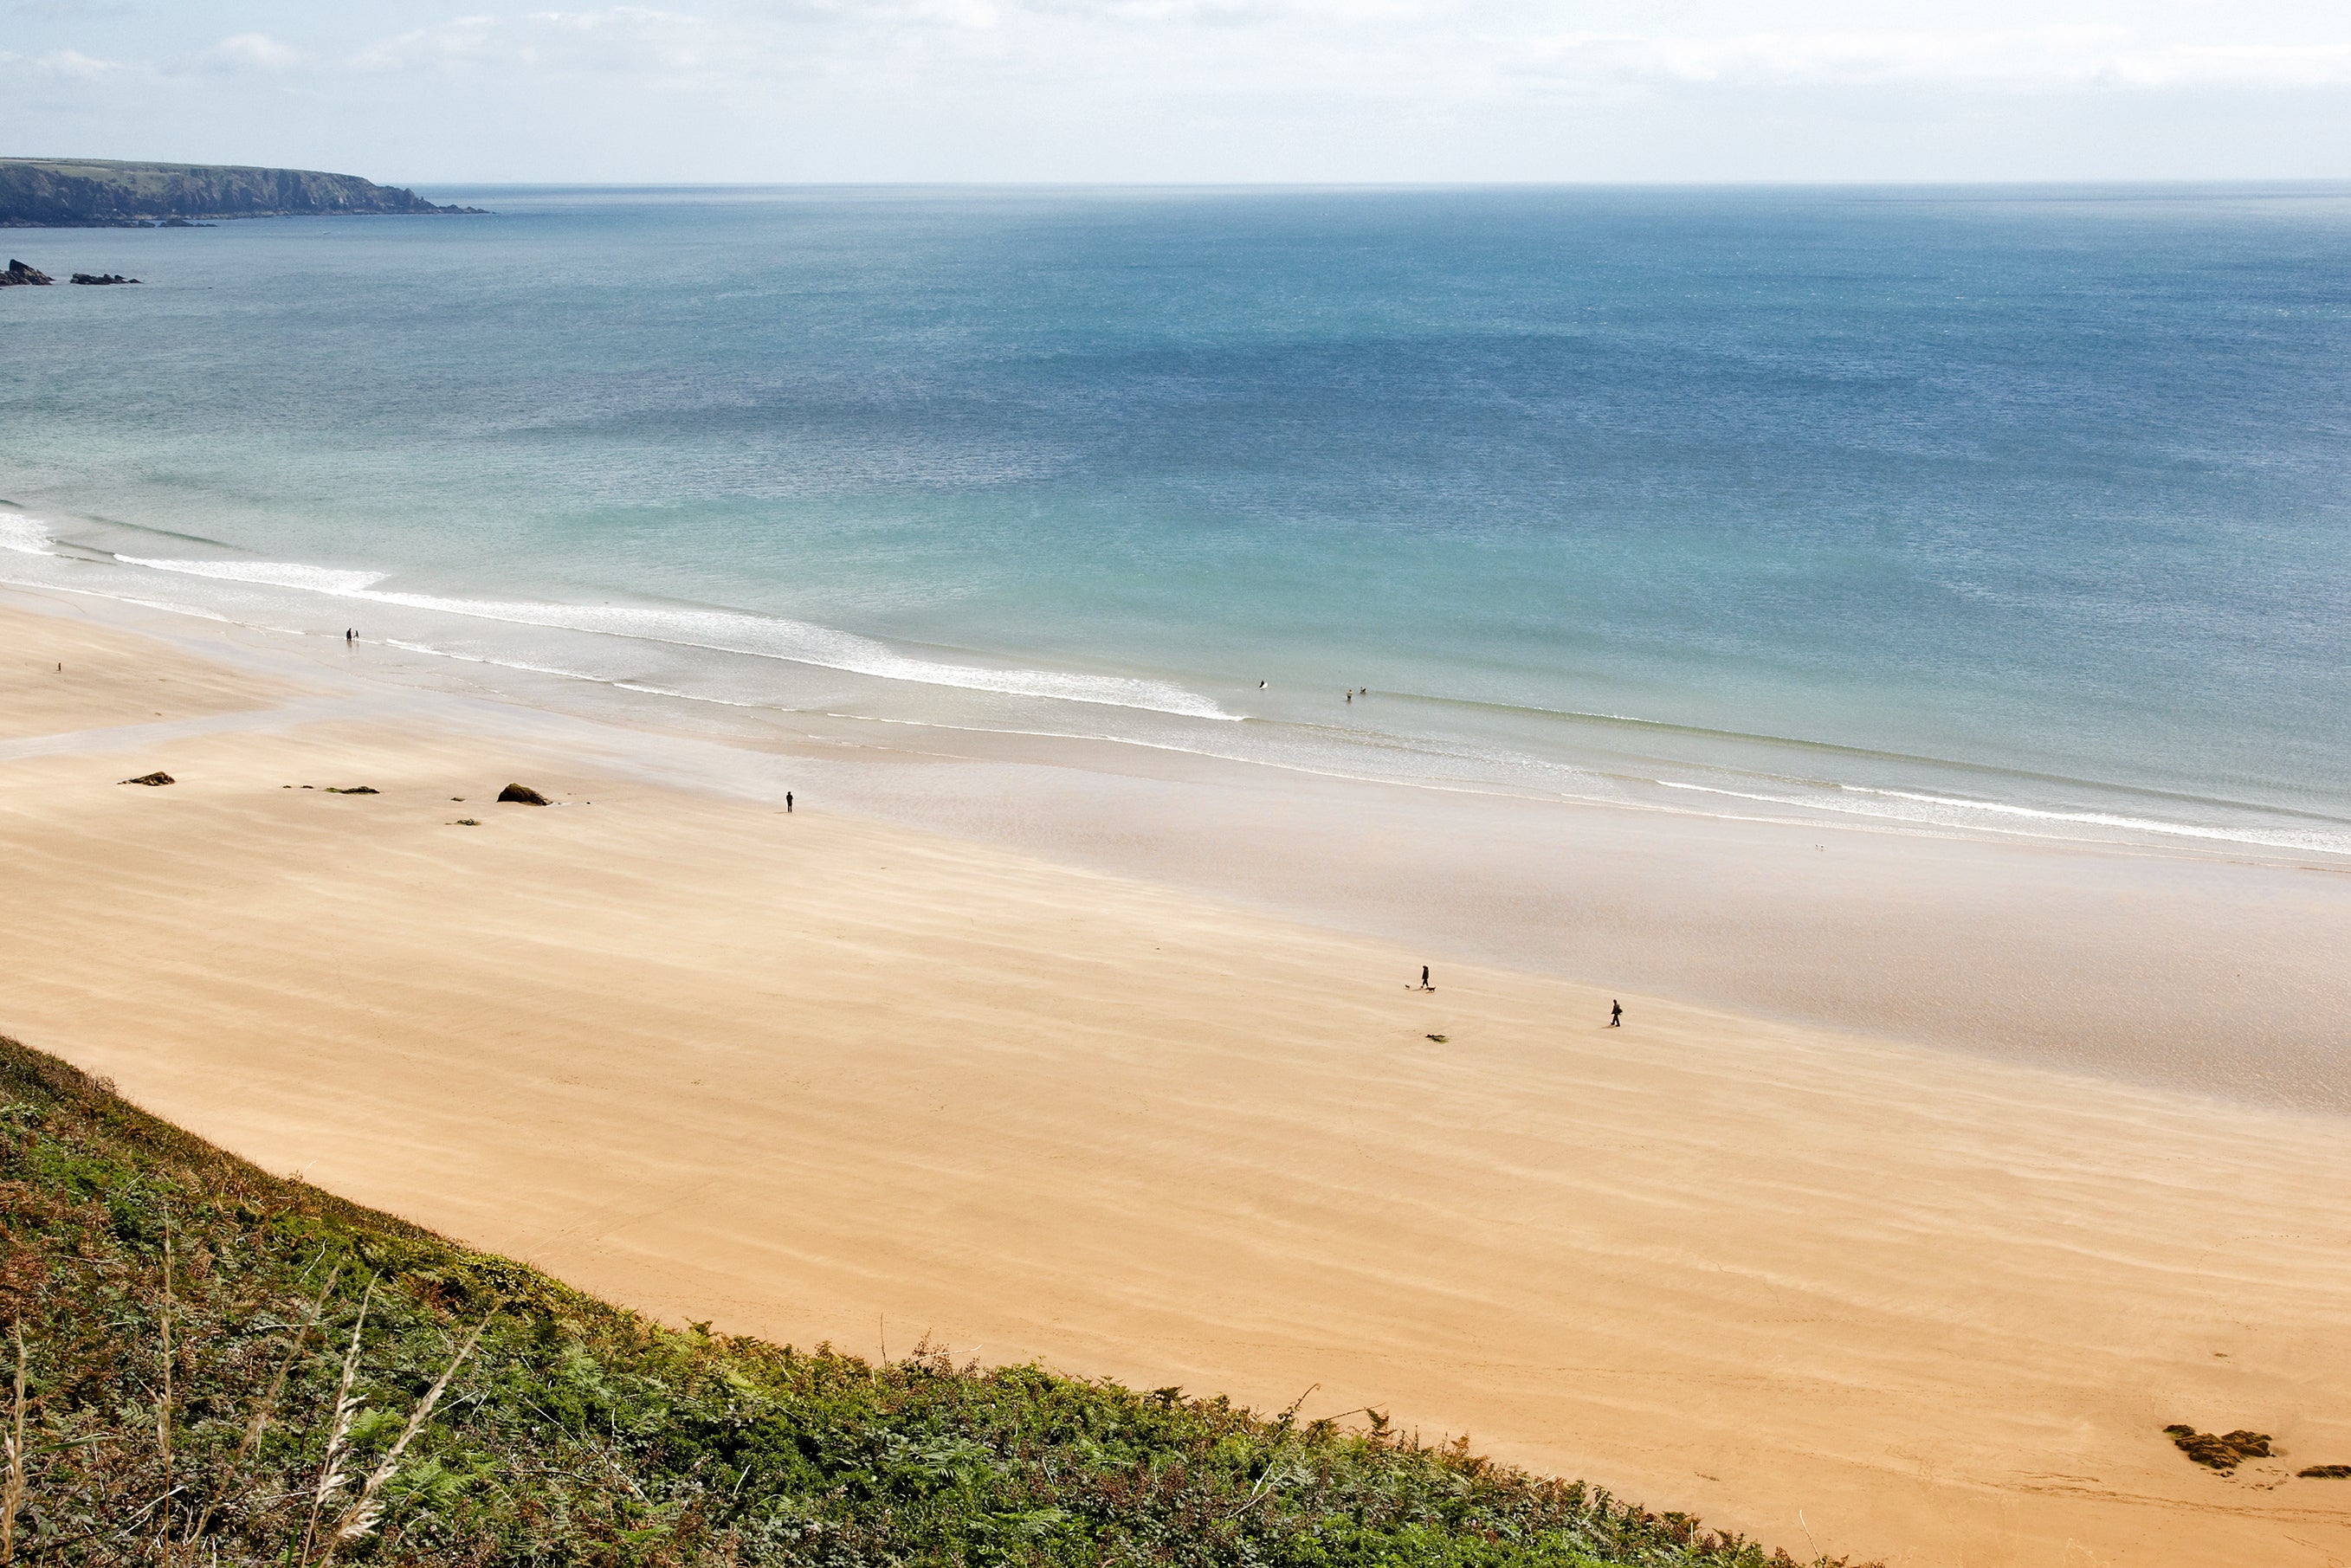 More than a mile of sand makes up Marloes Beach in Pembrokeshire – and dogs will love it